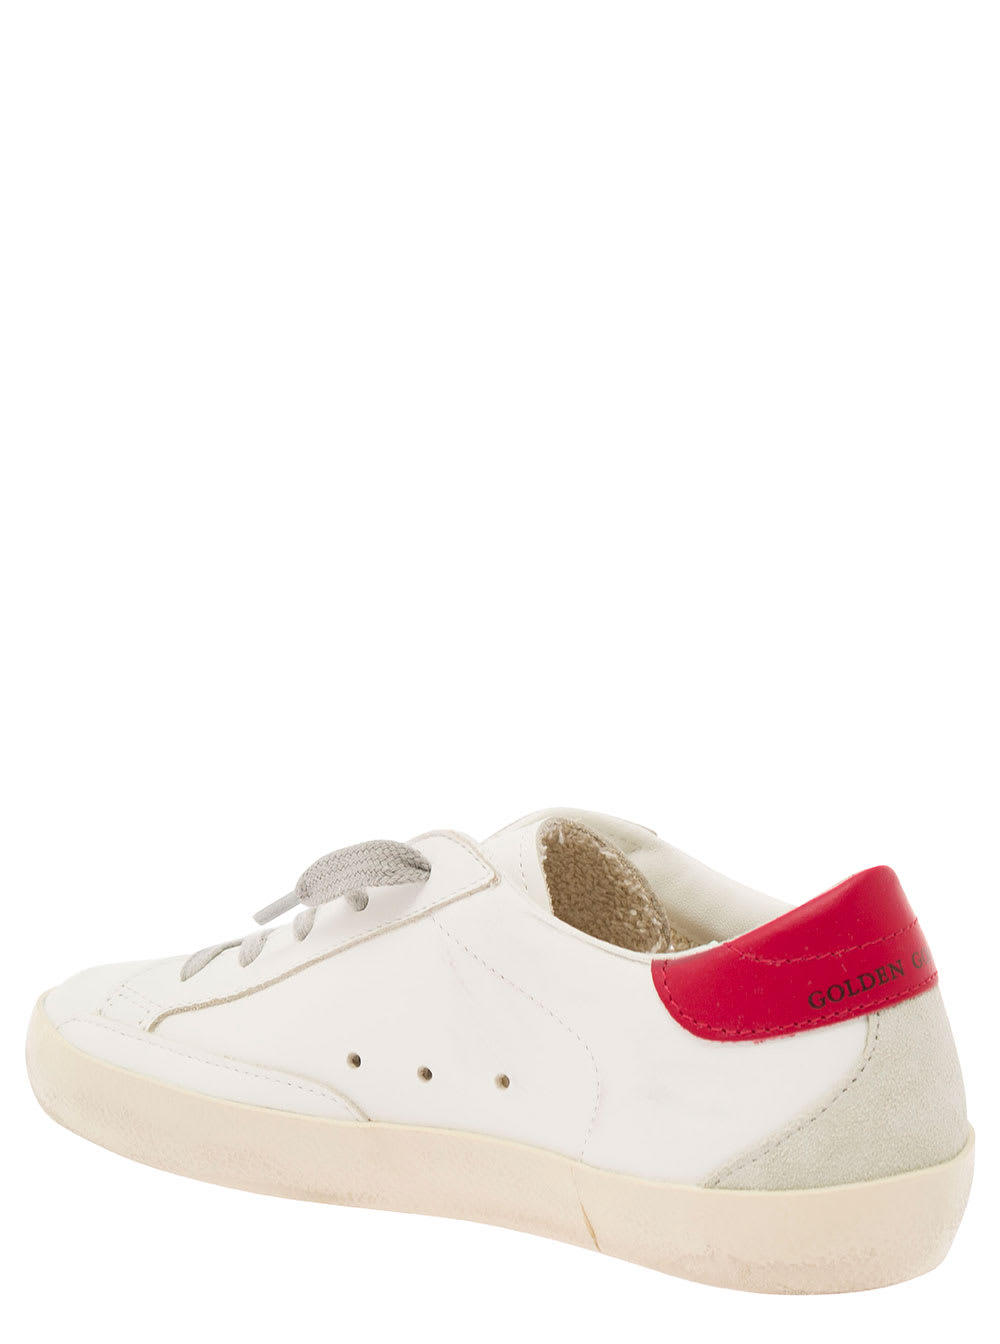 Shop Golden Goose Superstar White Low Top Sneakers With Star Patch In Leather Boy